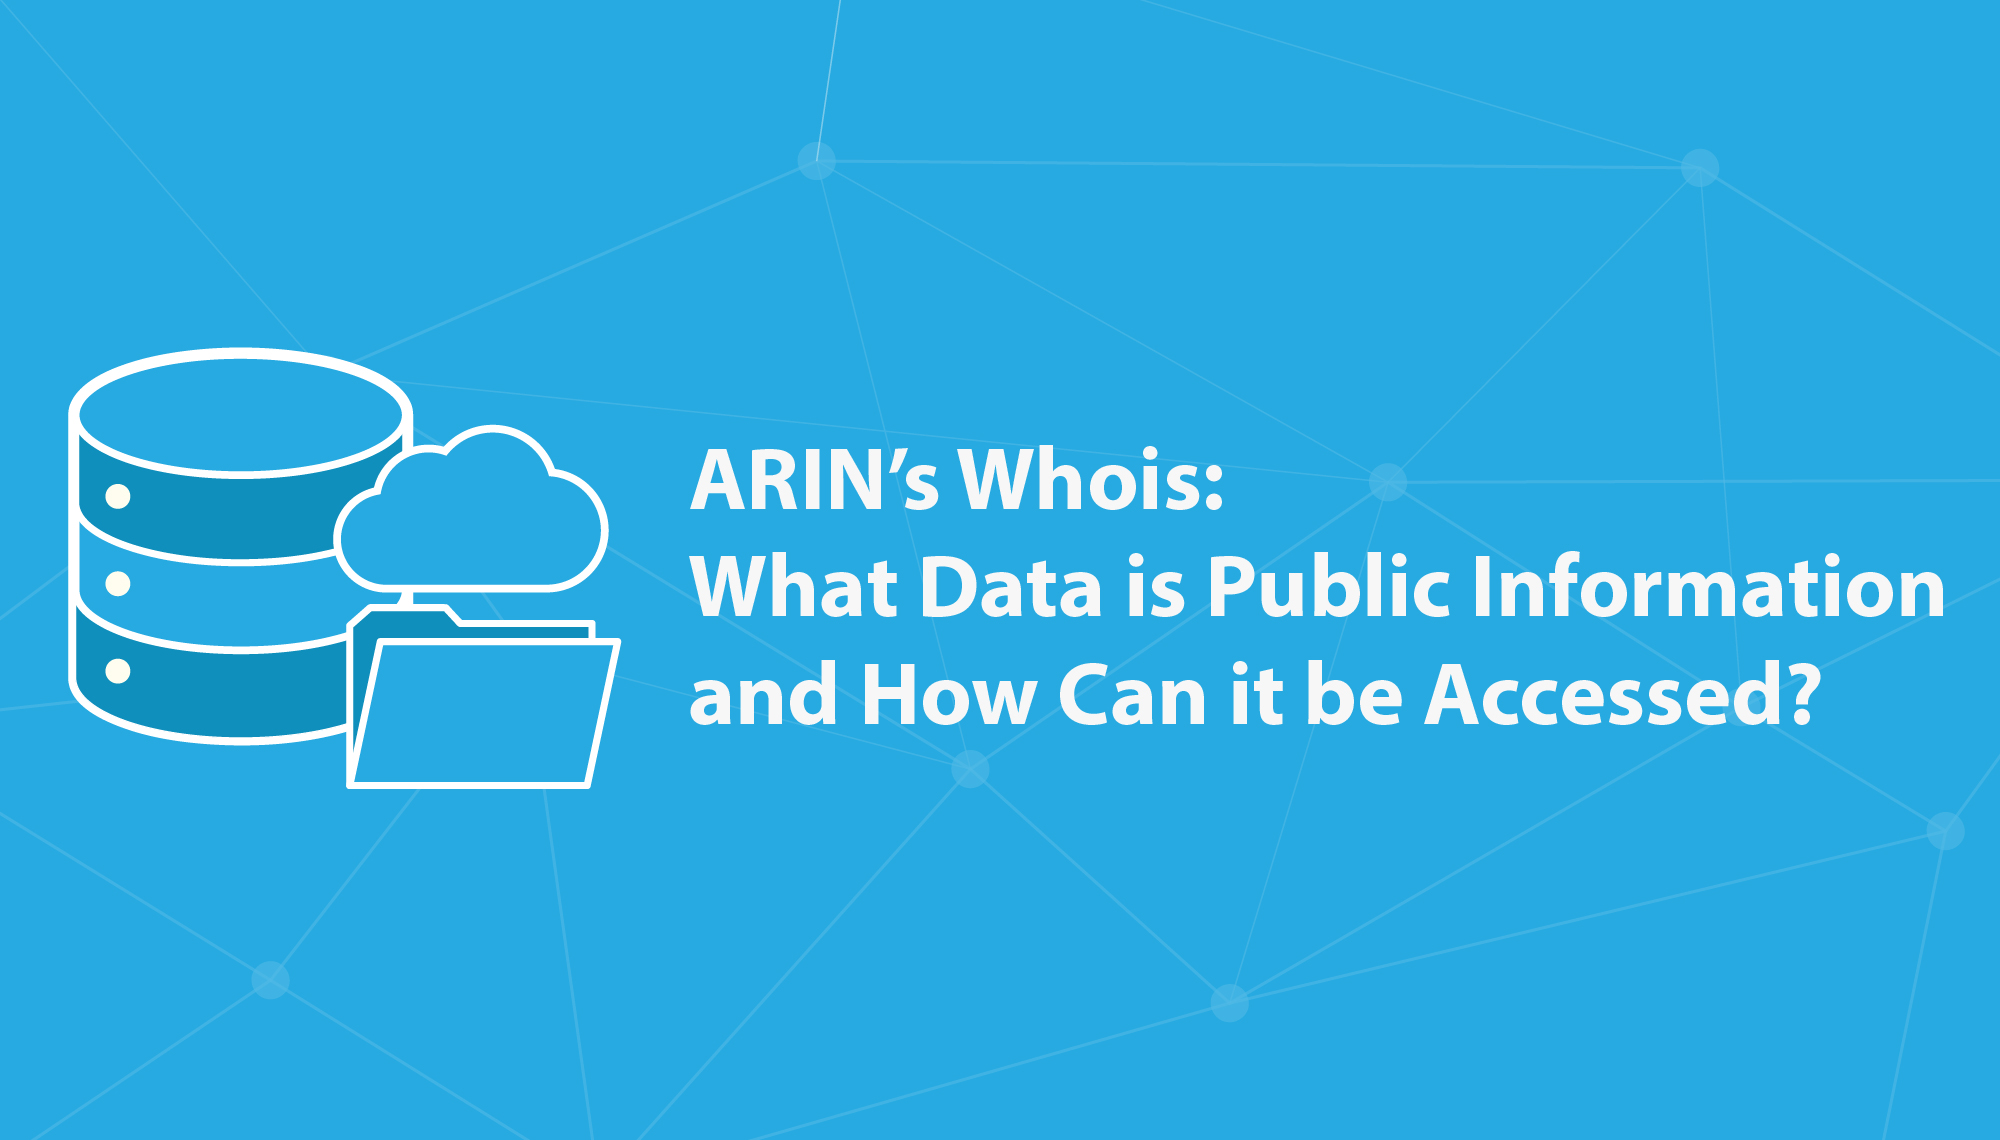 ARIN’s Whois: What Data is Public Information and How Can it be Accessed?